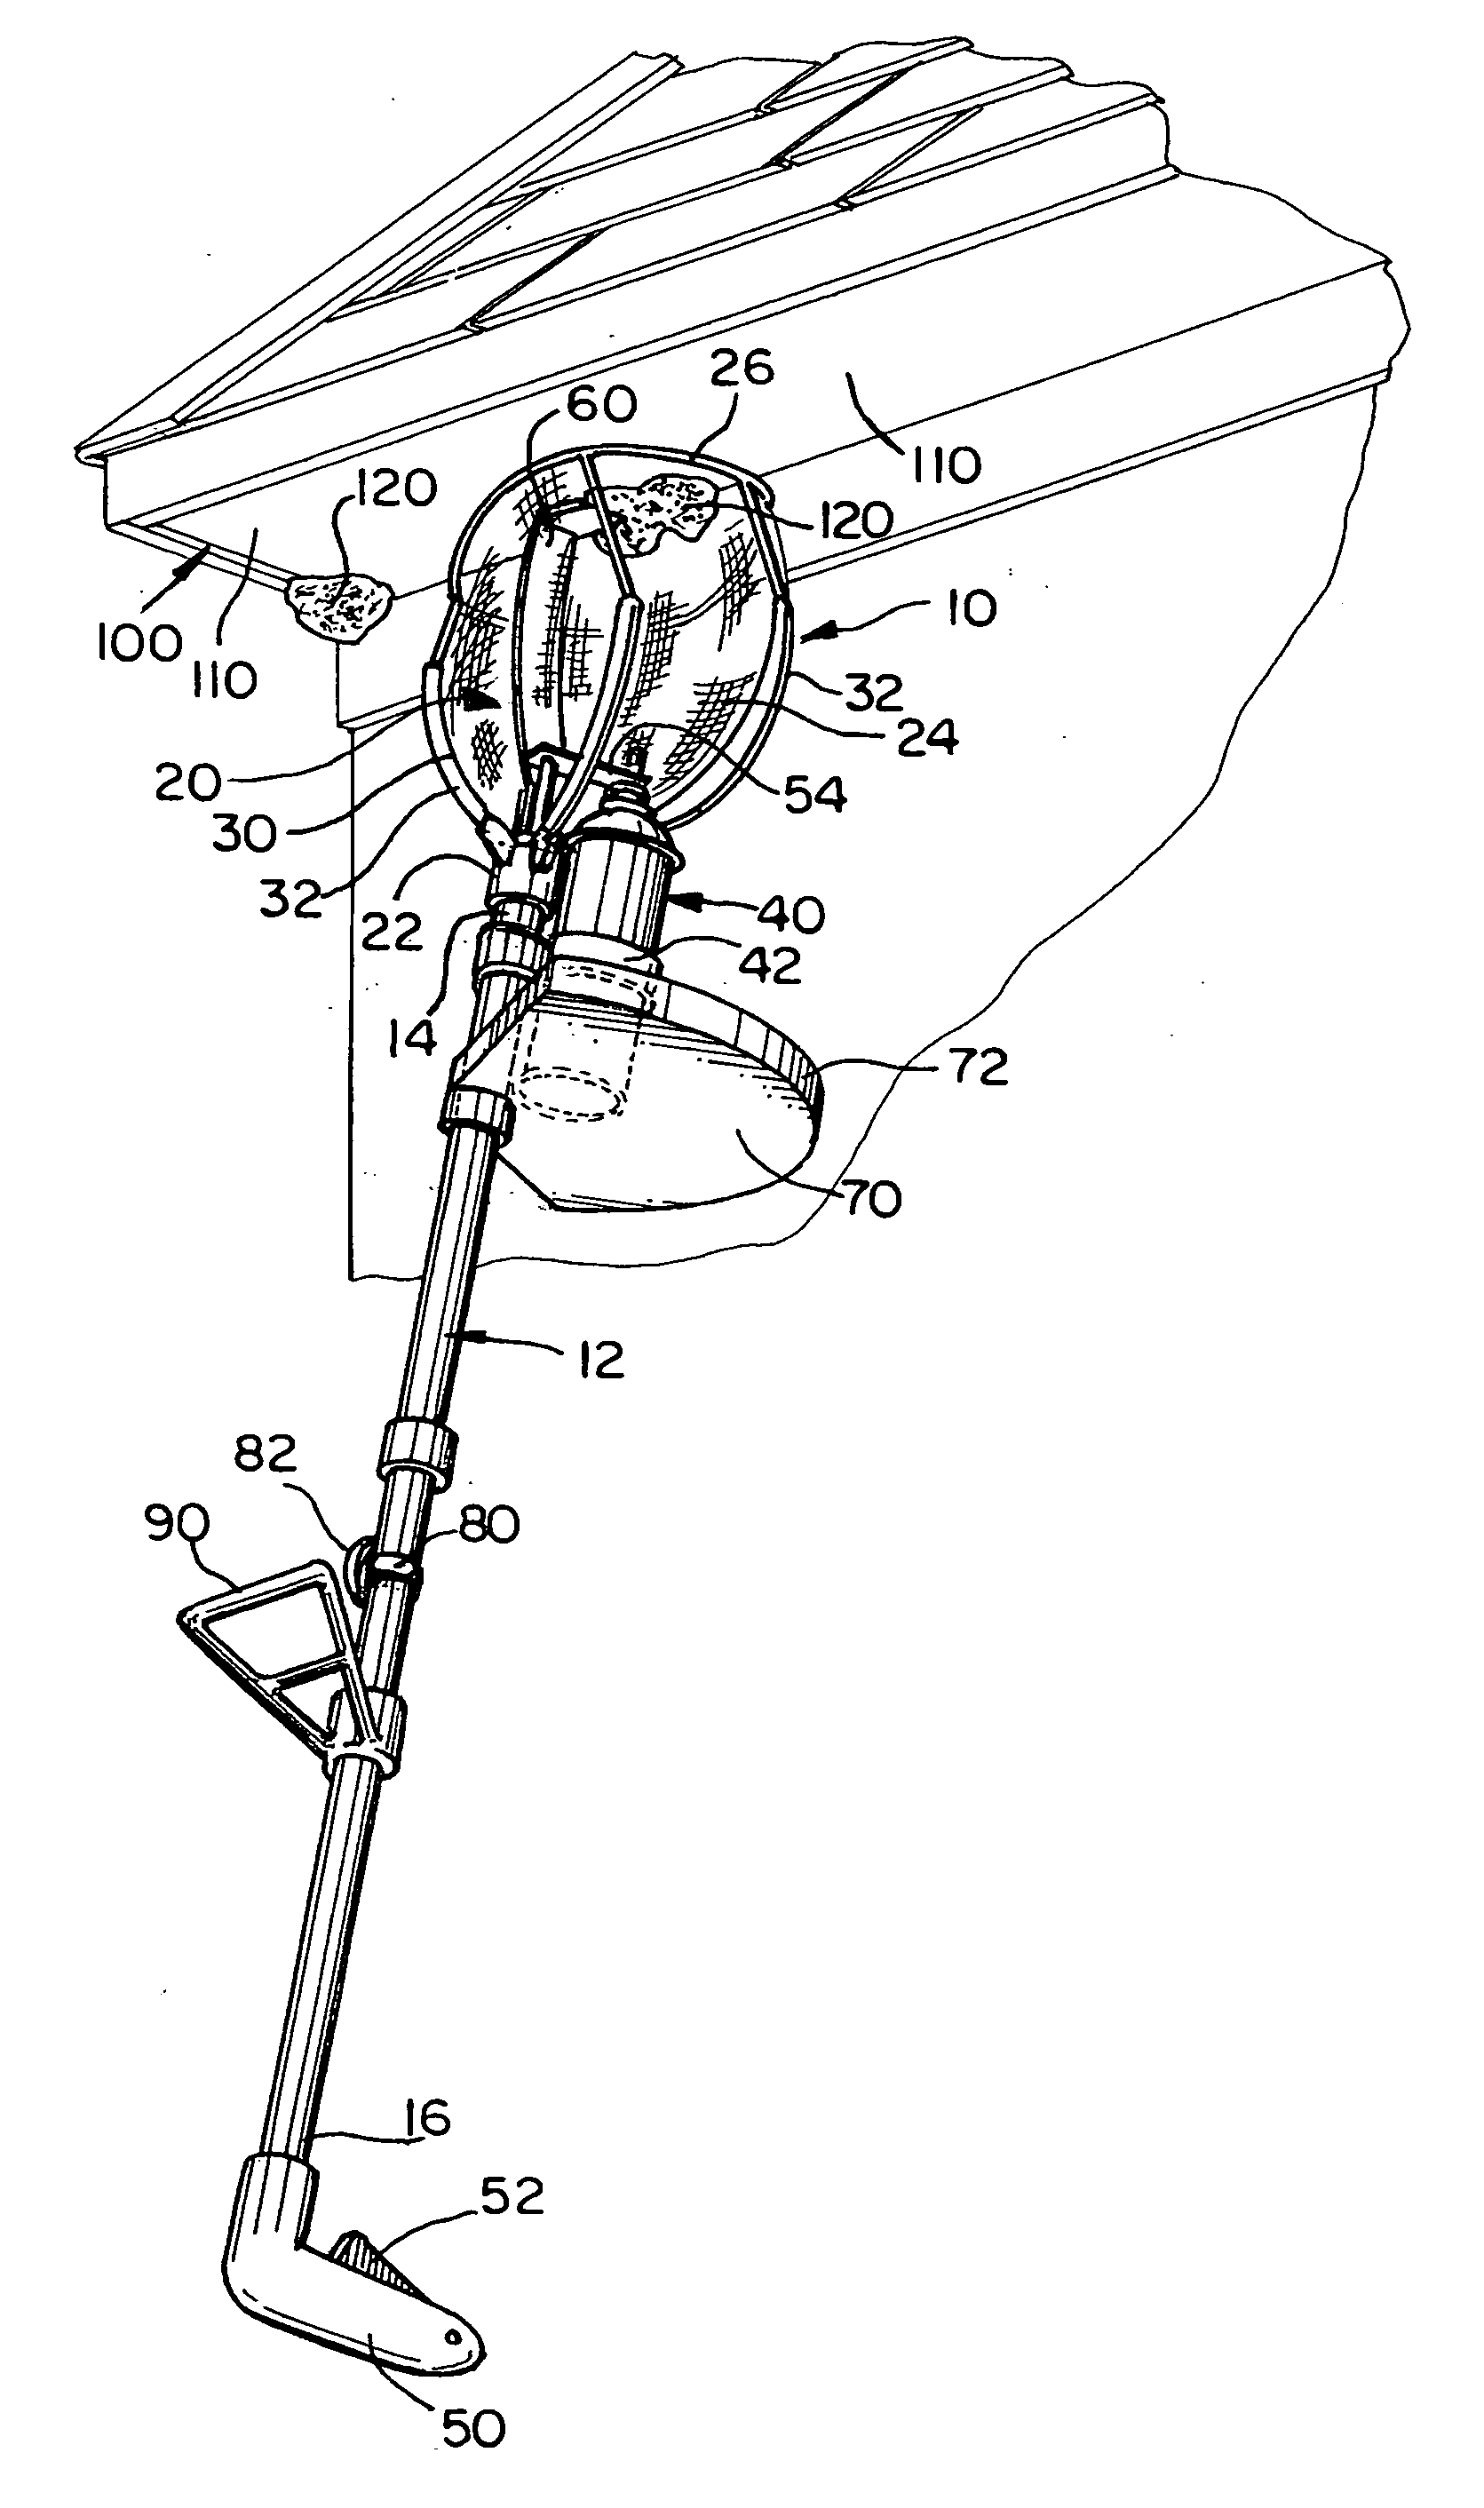 Insect and nest removal device